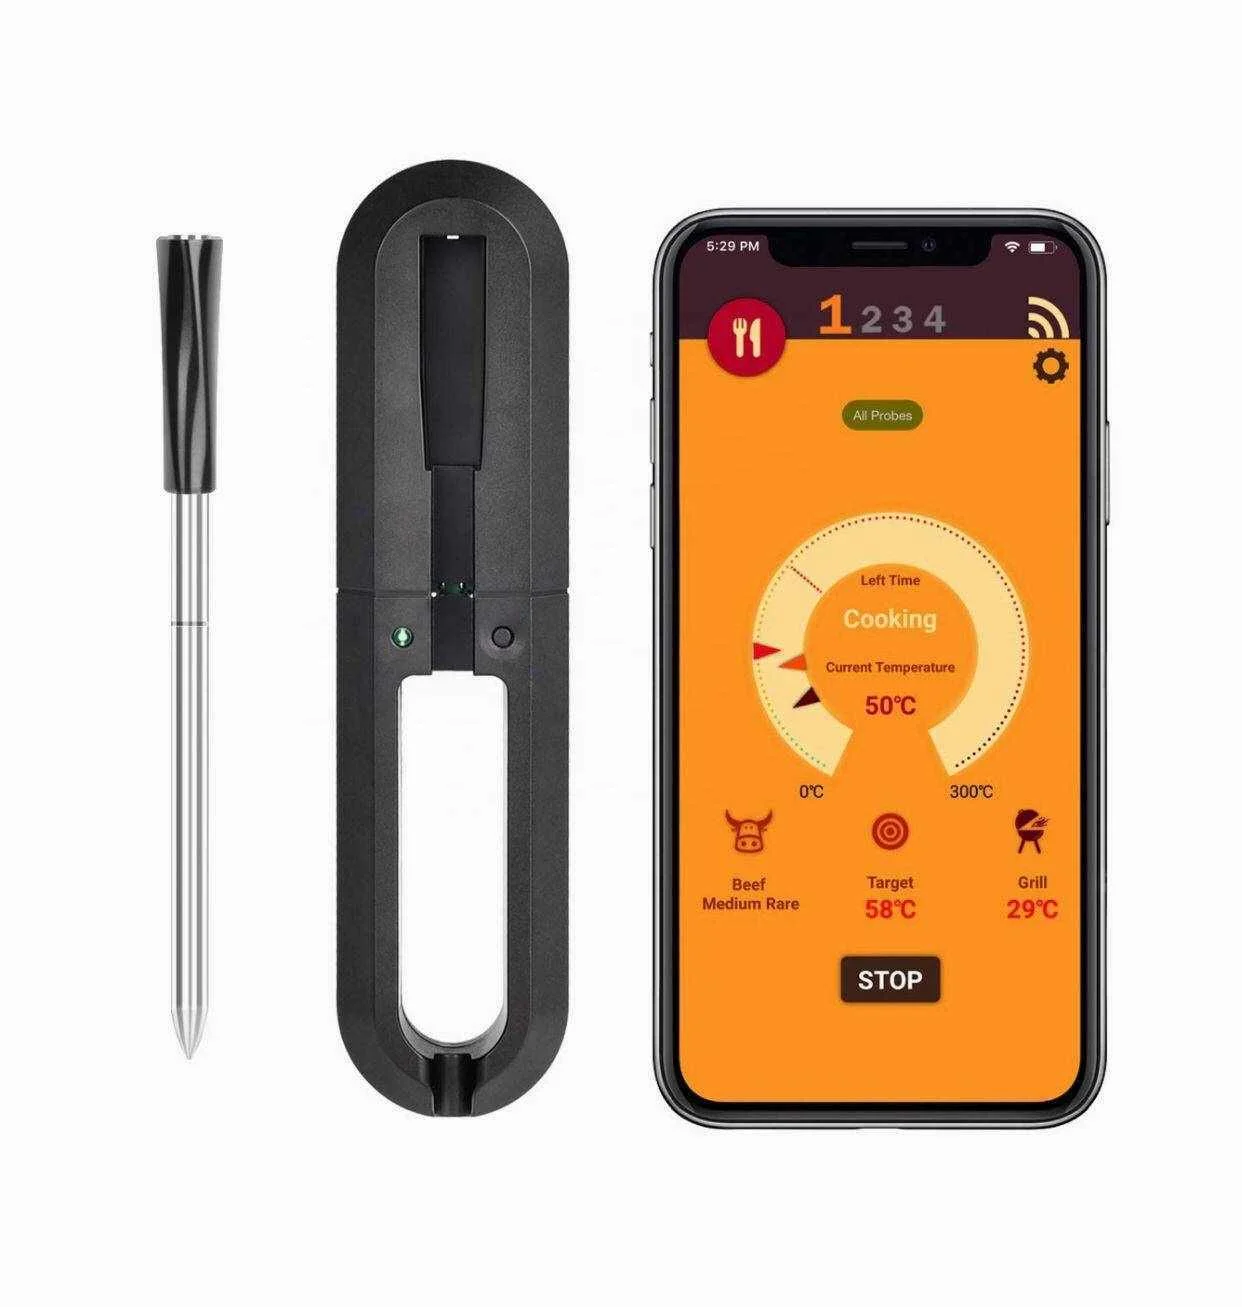 Wireless Bbq Cooking Meat Thermometer With Phone App - Buy Bbq Cooking Meat Thermometer,Wireless Bbq Thermometer,Meat Wireless Thermometer Product on